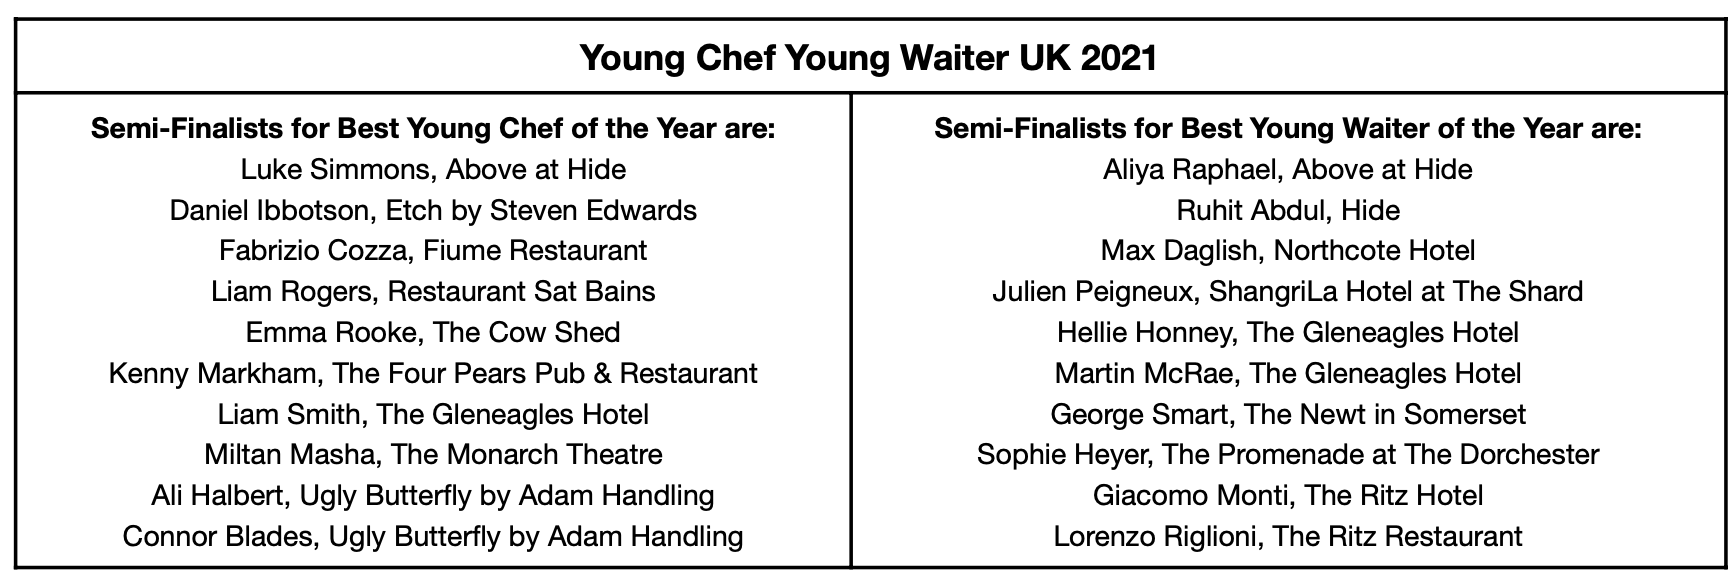 Young Chef Young Waiter